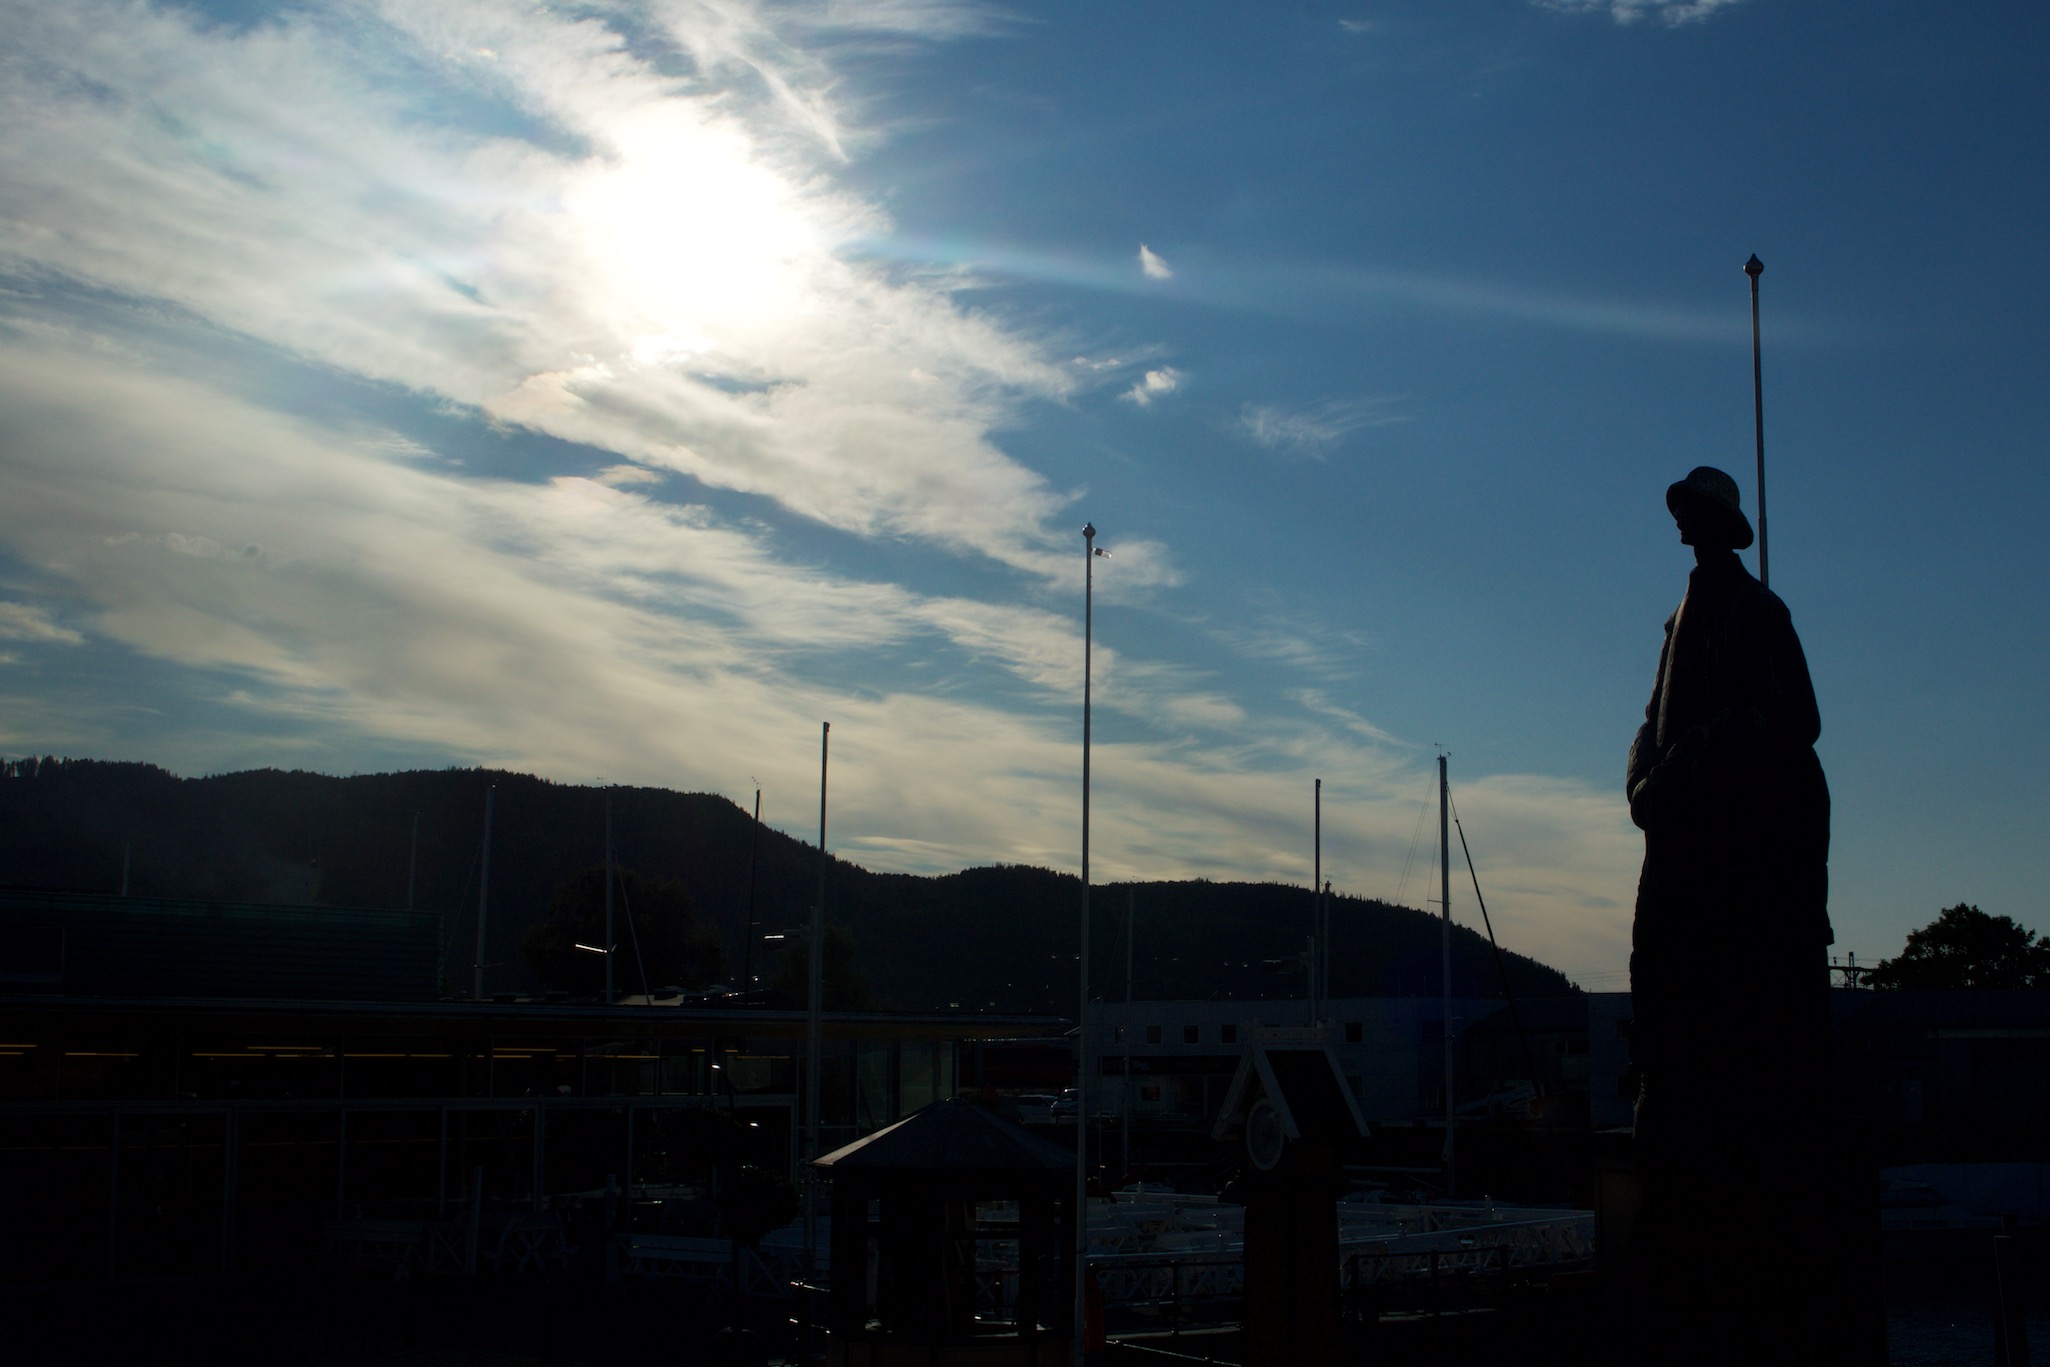 Sun setting behind The Last Viking Statue in Trondheim, Norway